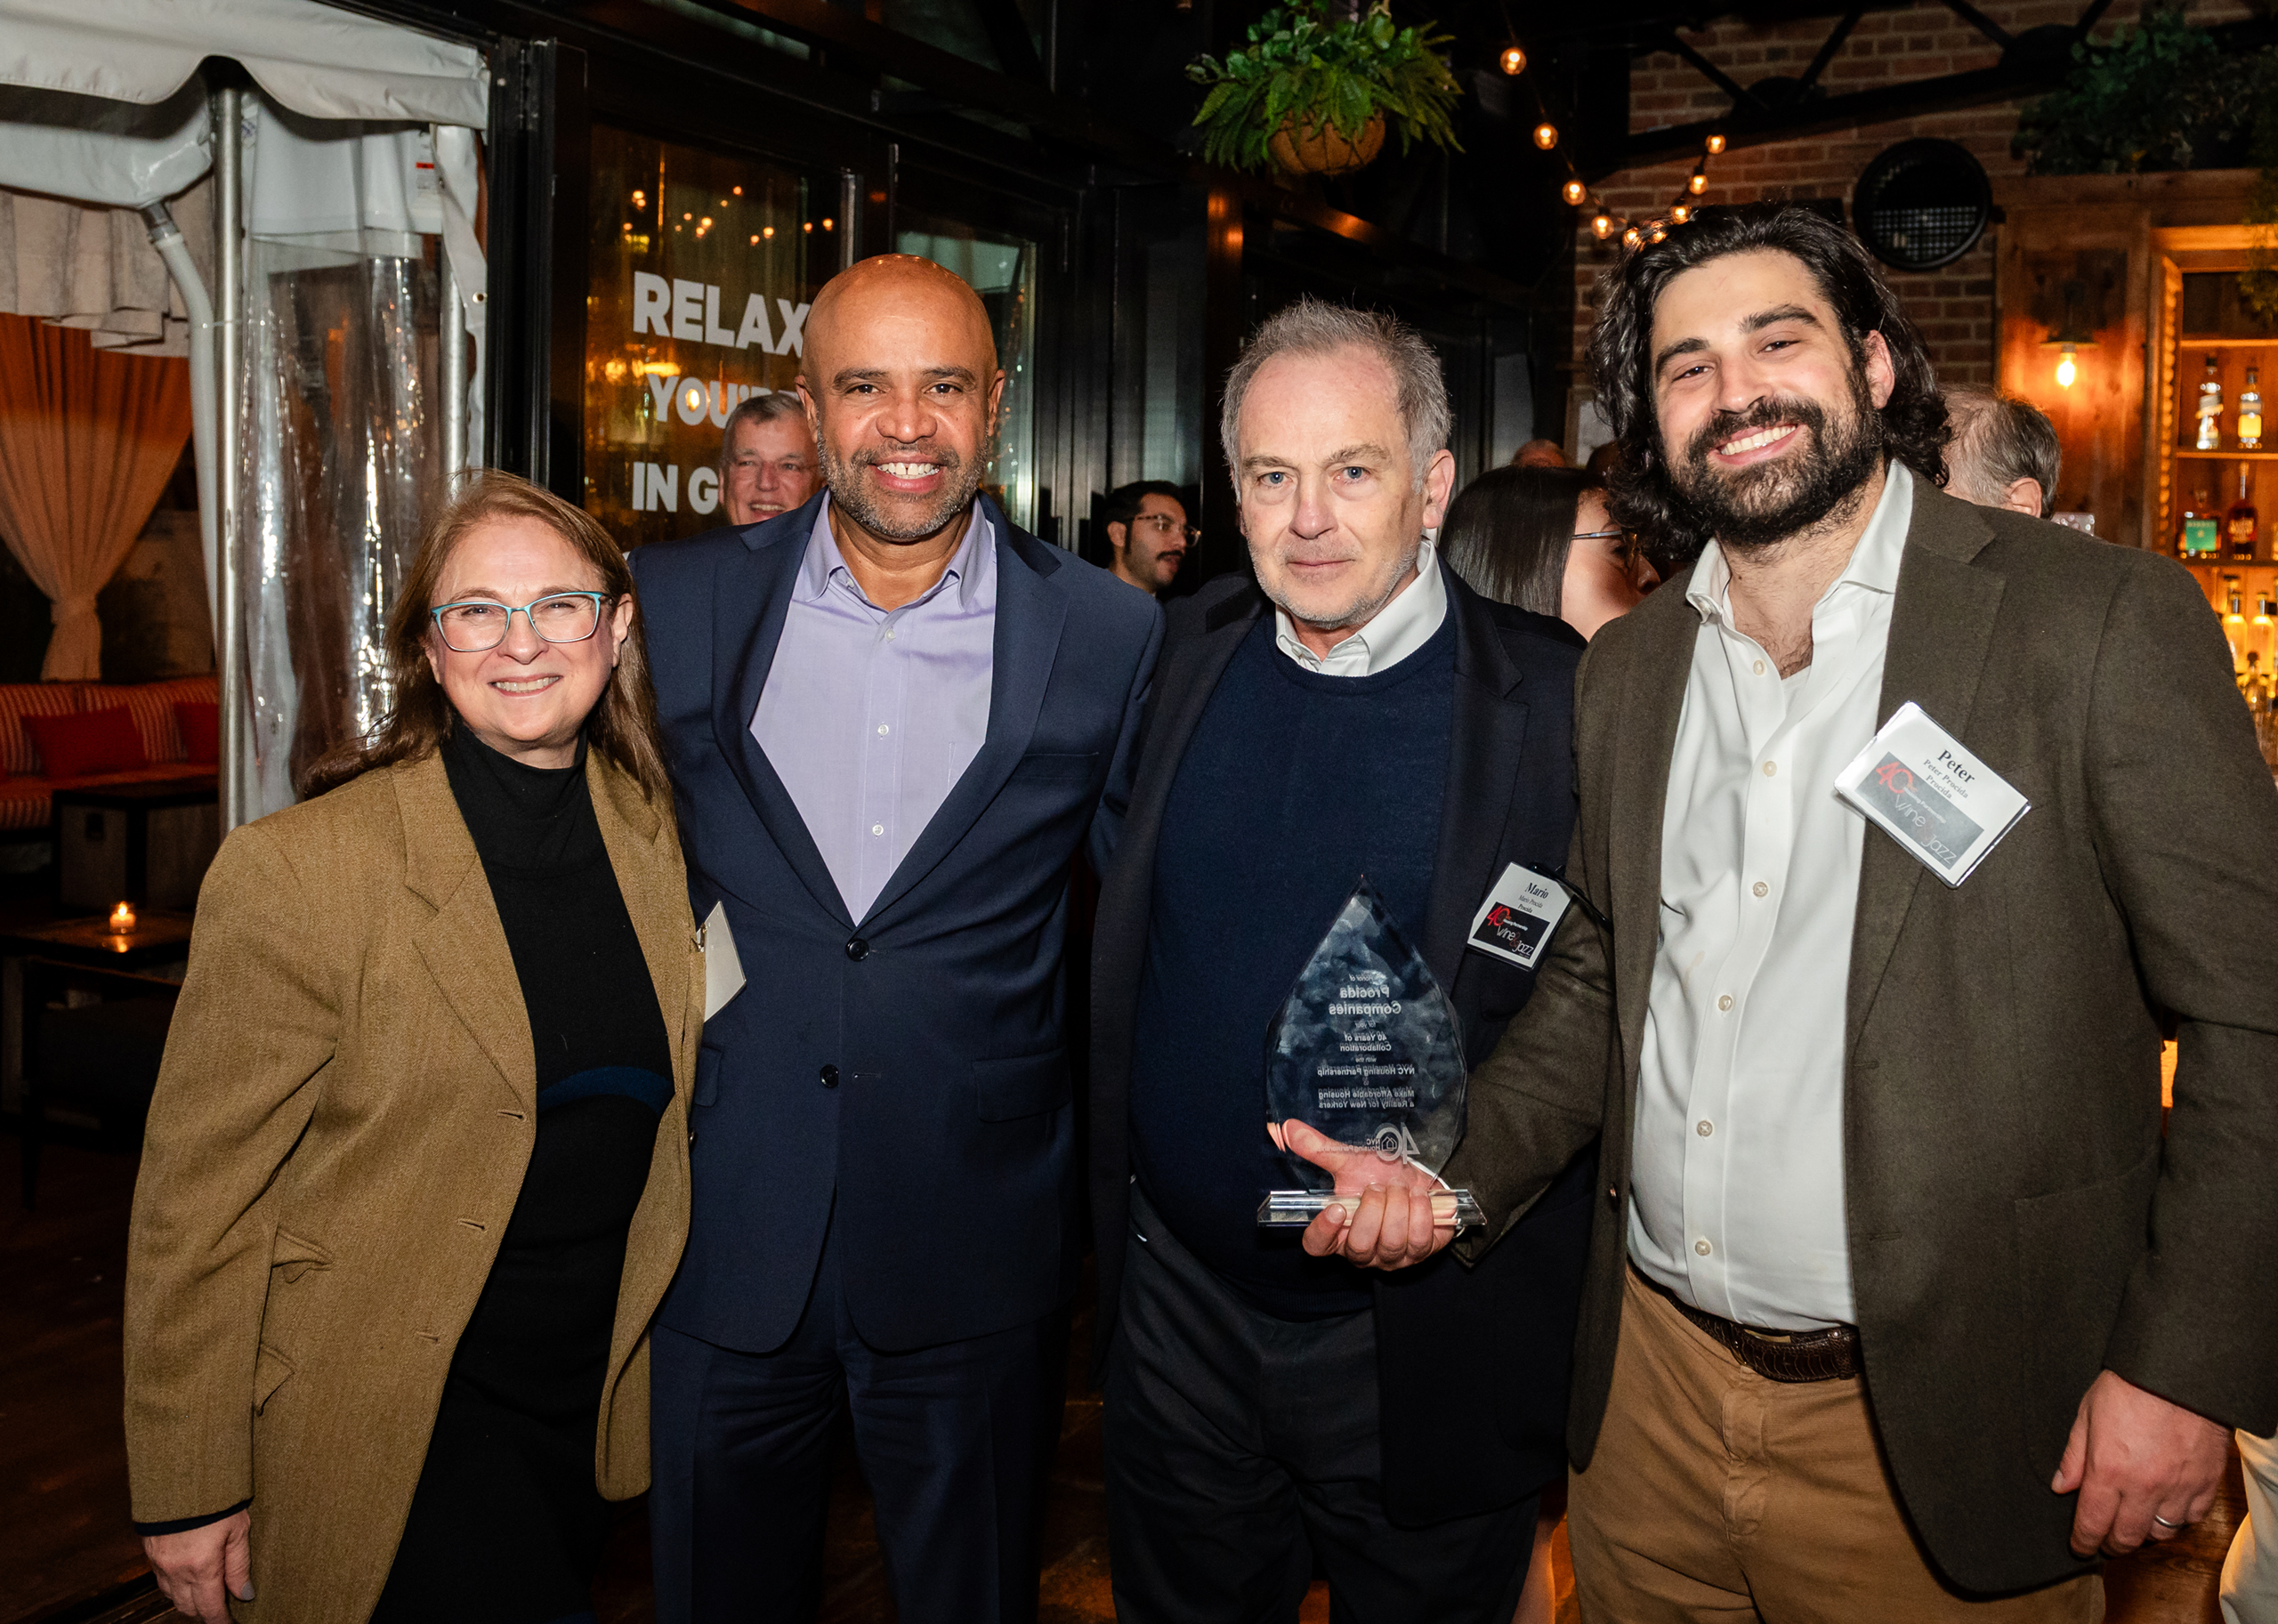 Adolfo Carrión, Jr. NYC HPD Commissioner (center right) with Mario Procida (center left) and other members of the Procida companies after receiving Founders Award.